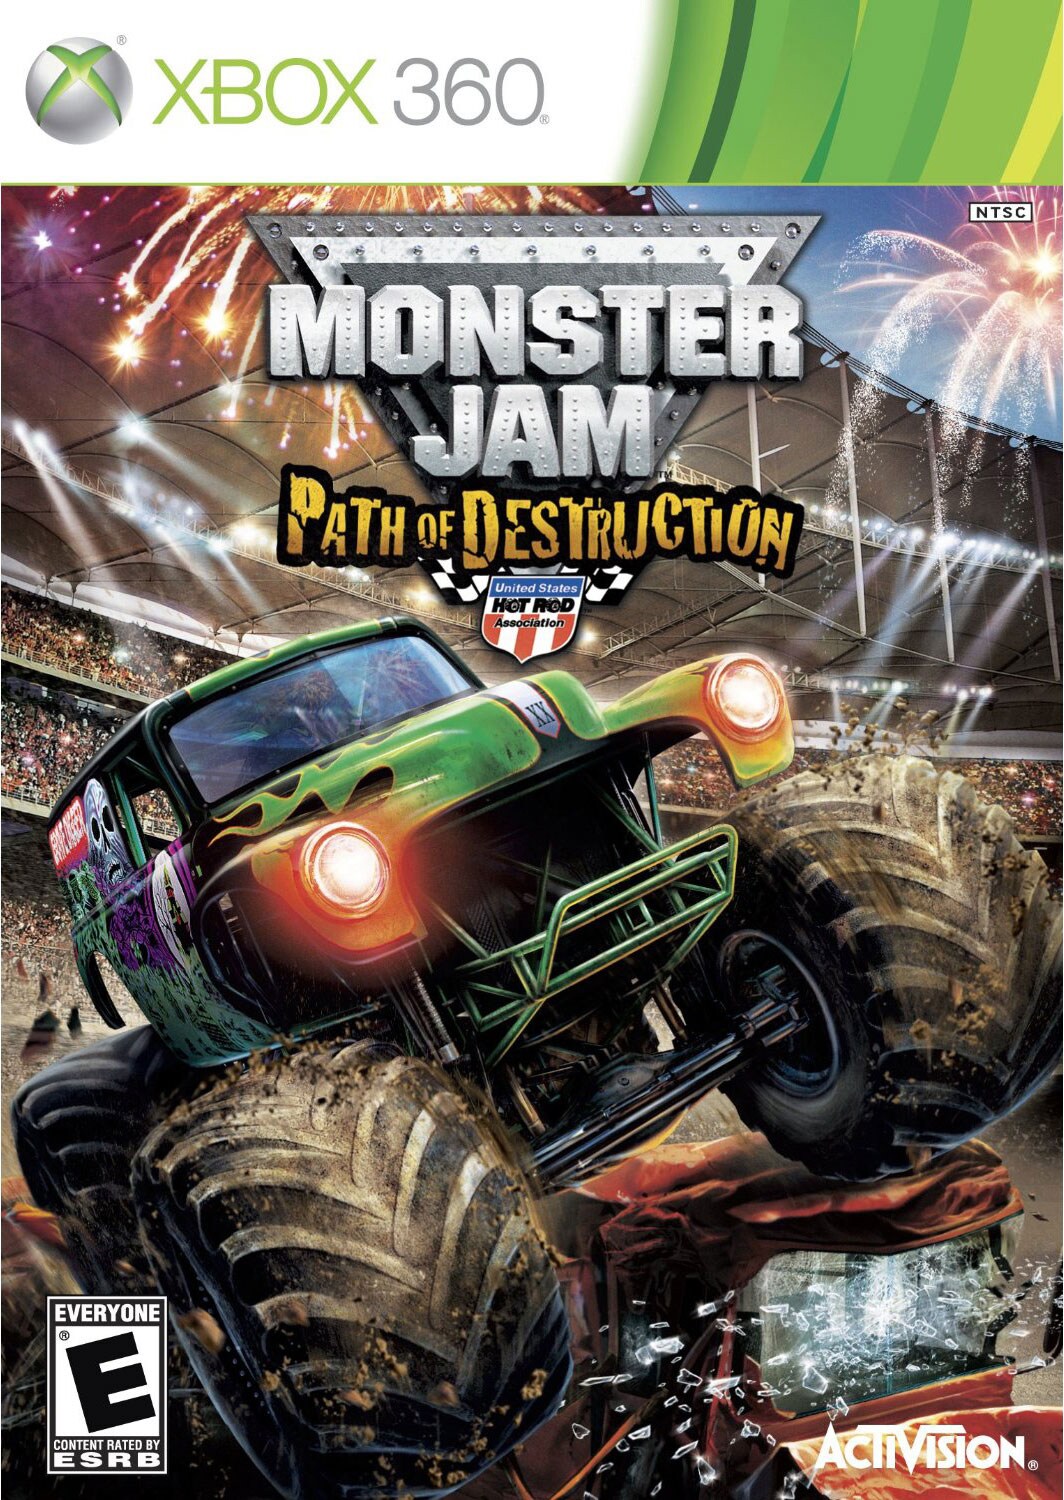 Xbox 360   Monster Jam 3 Path of Destruction   By Activision Inc